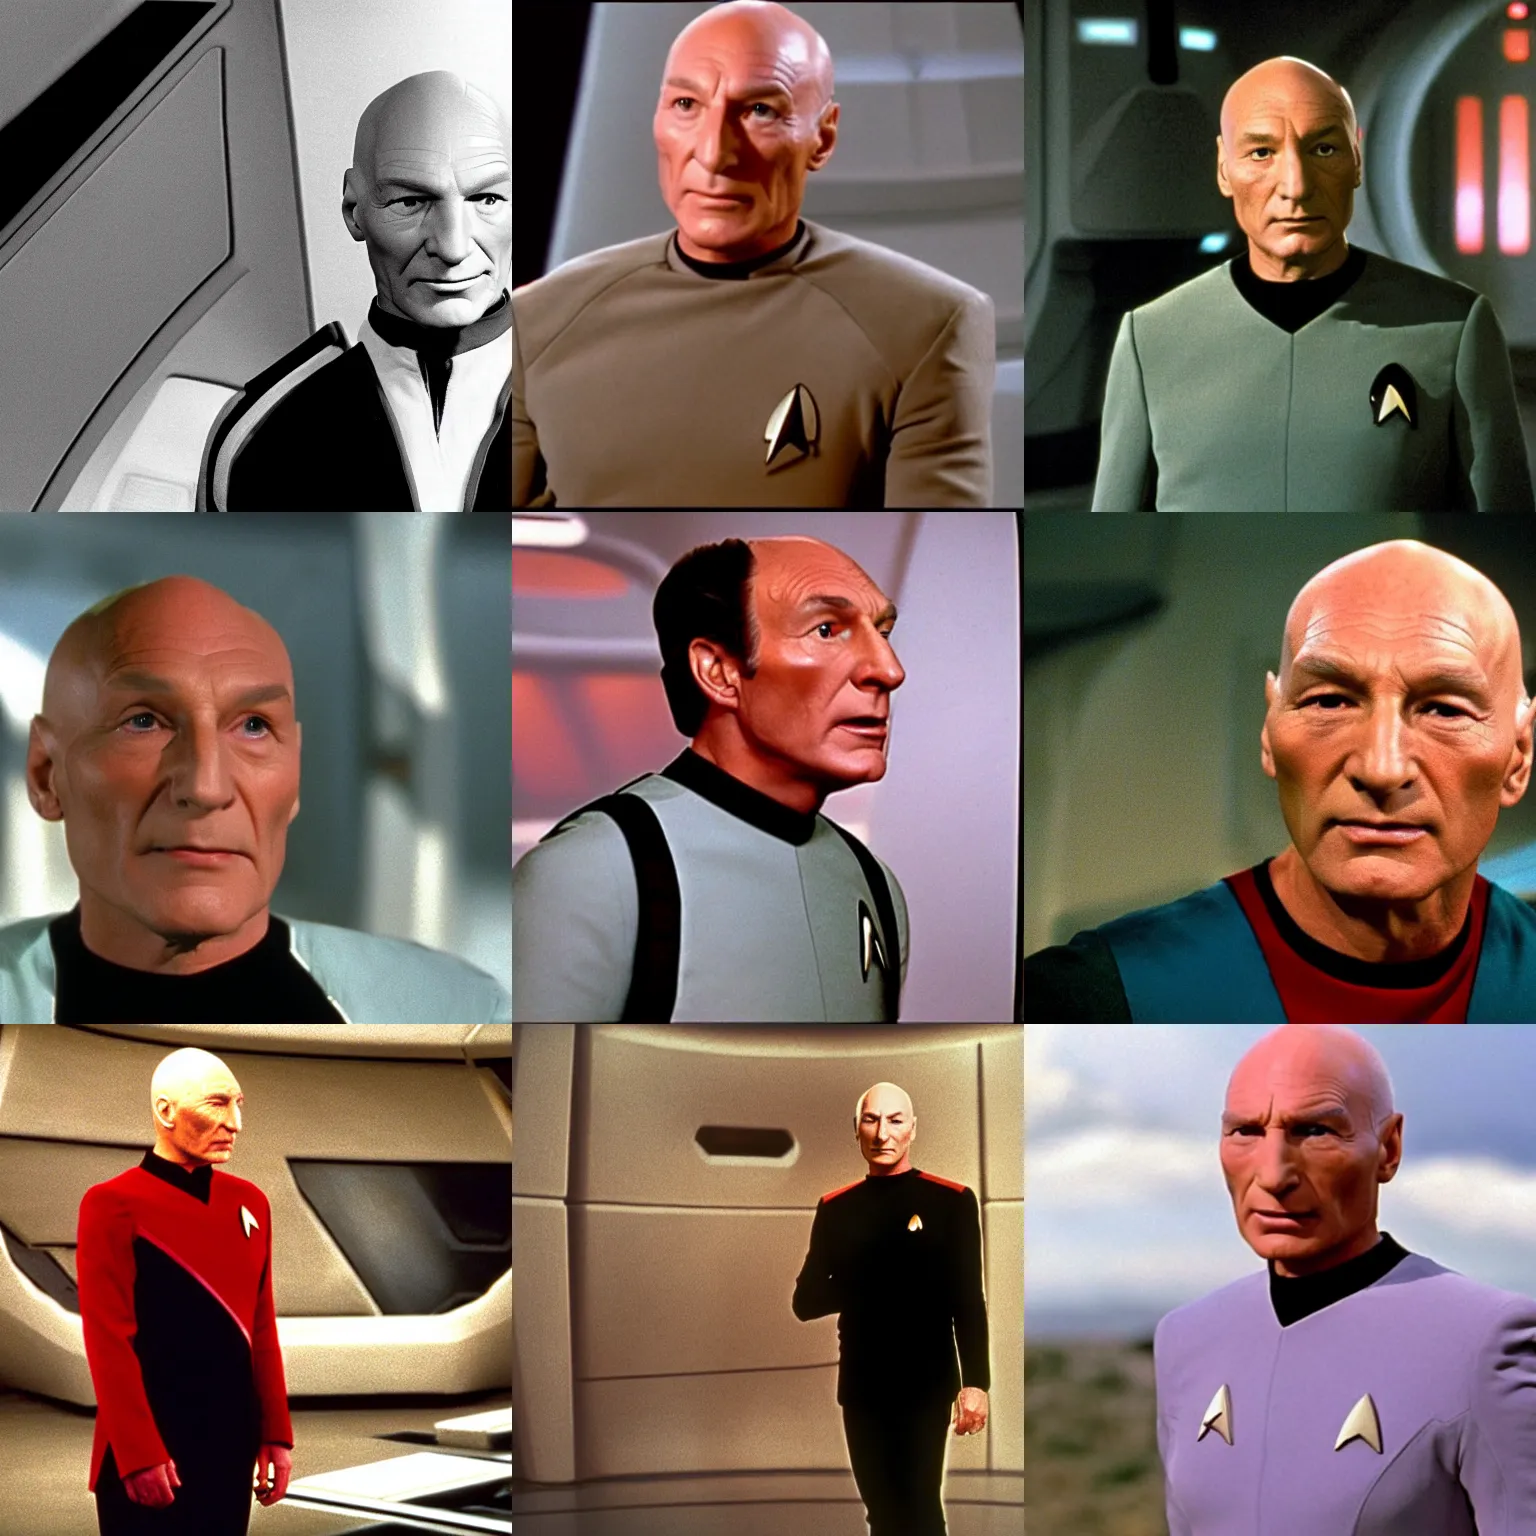 Prompt: Picard in Star Trek The Next Generation 1987